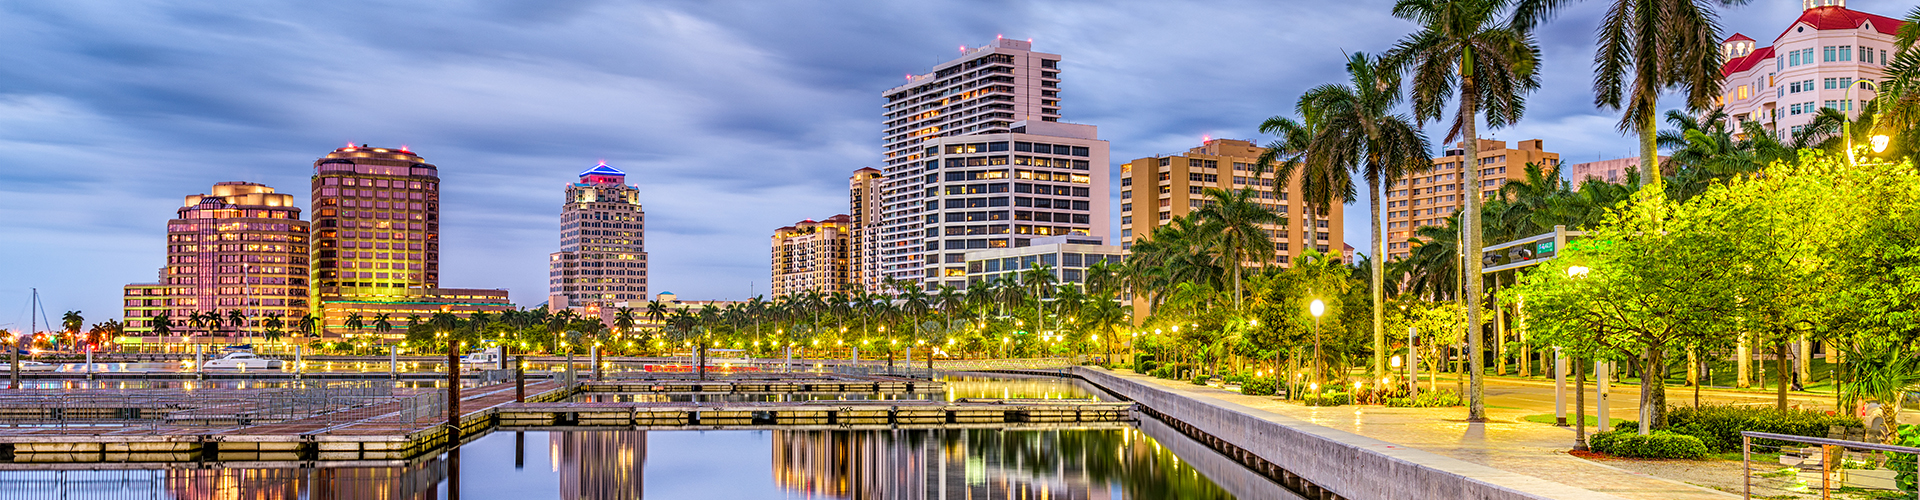 Night View of West Palm Beach Florida